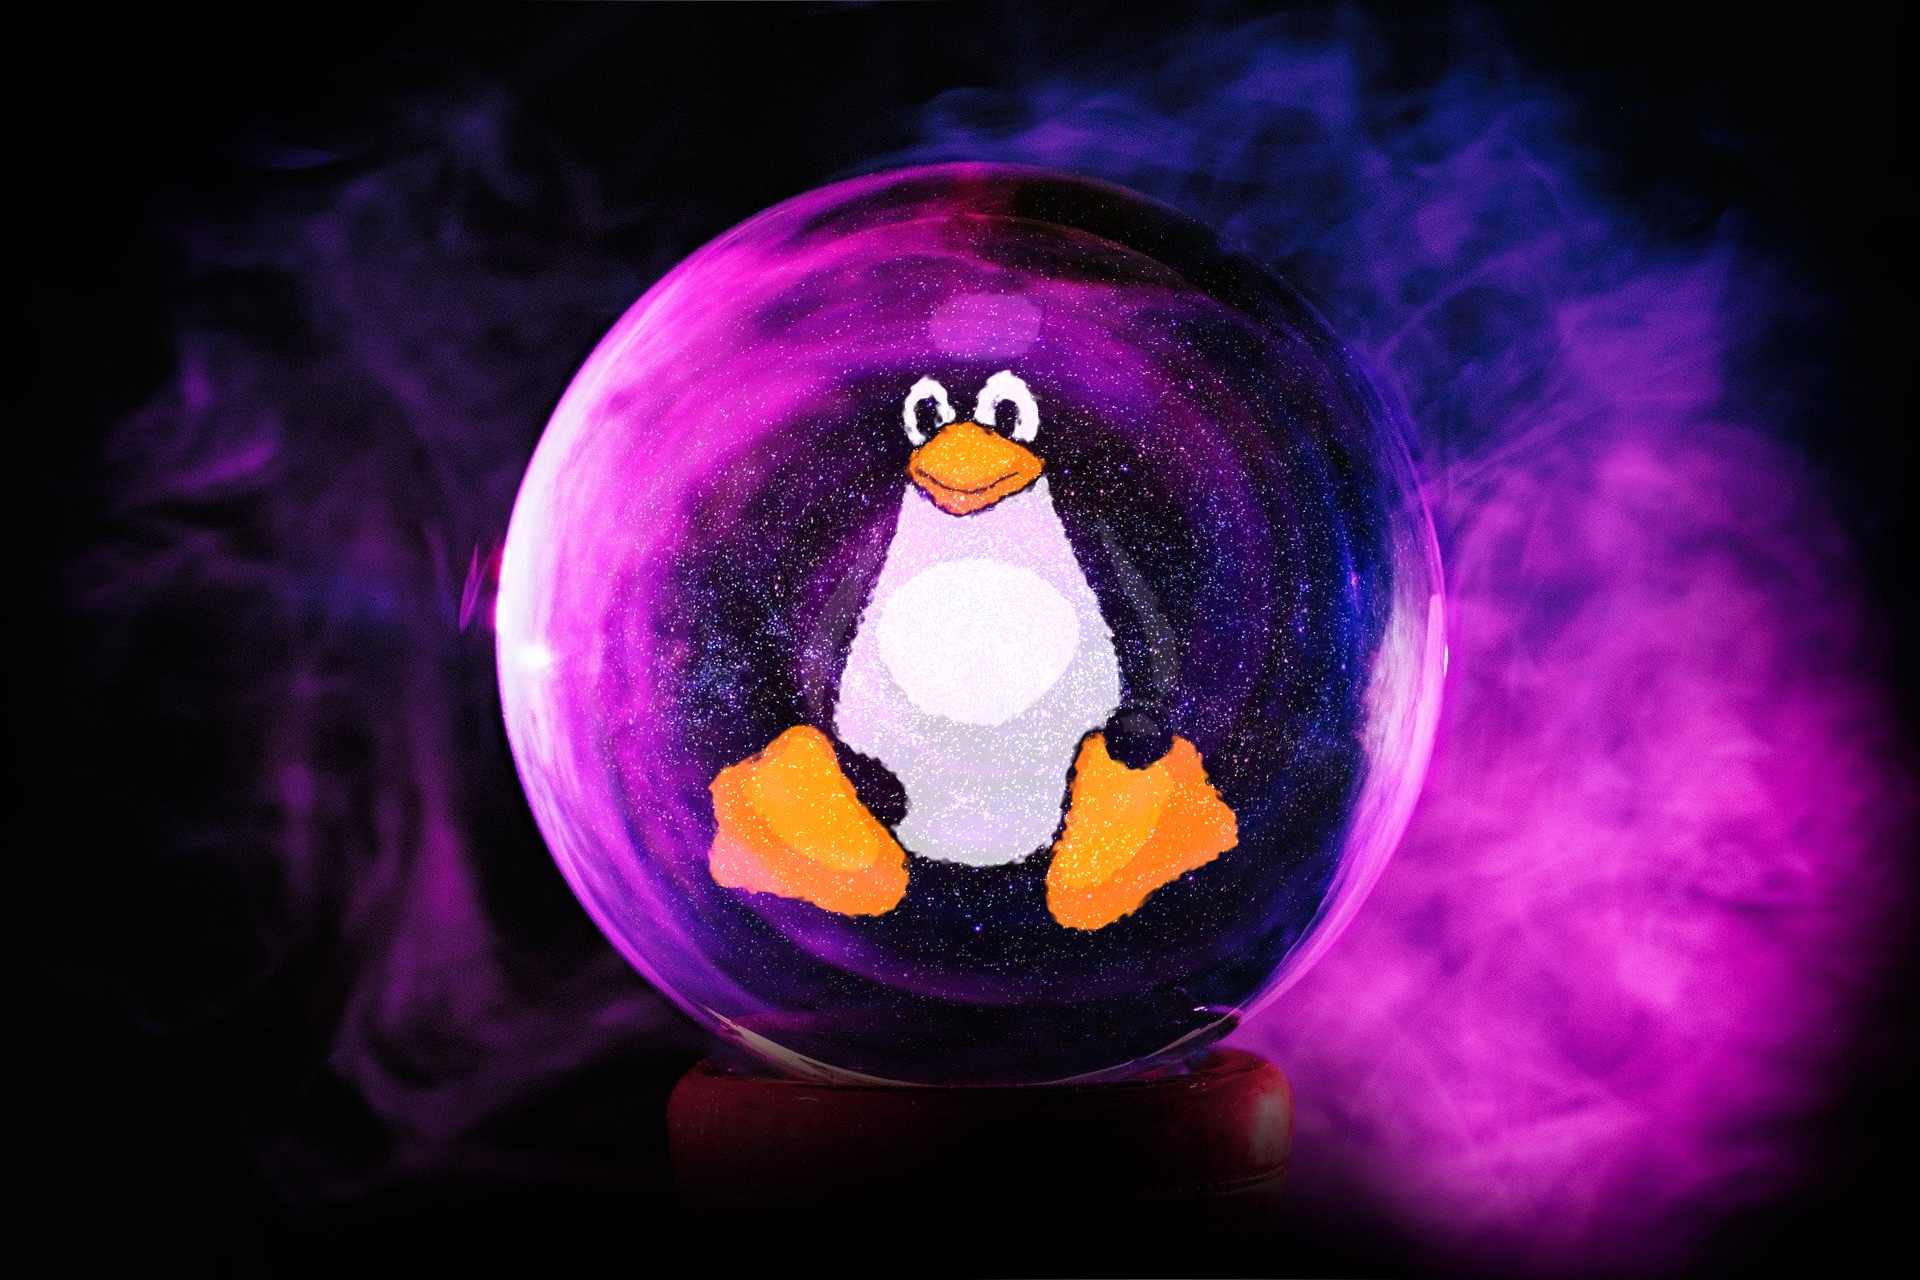 5 Bold Predictions for Linux & Open Source in 2020